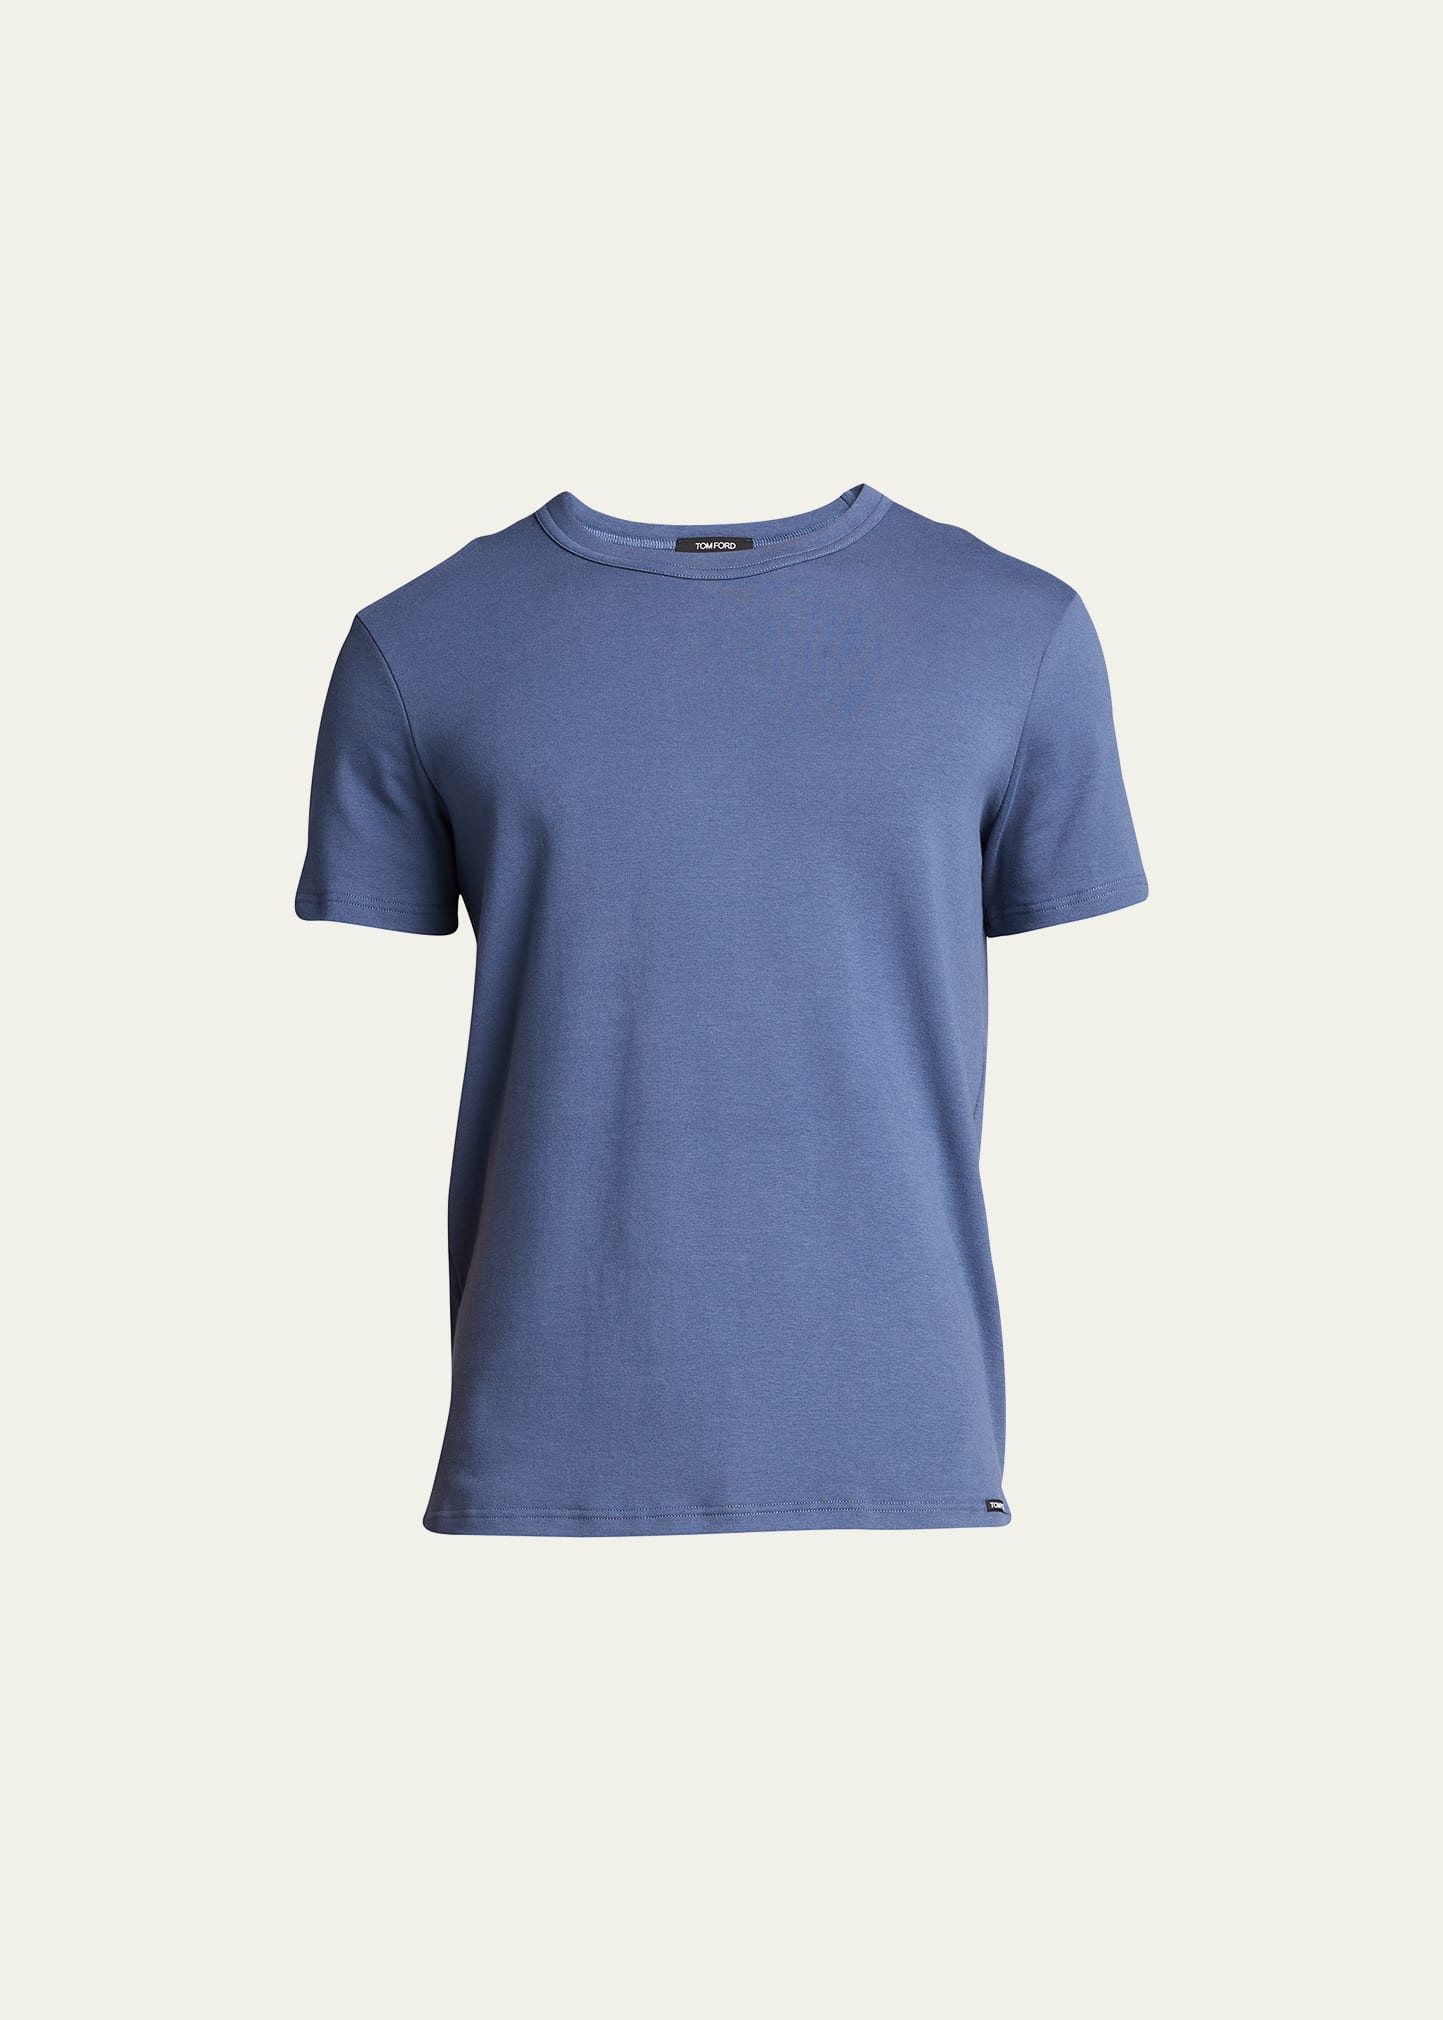 TOM FORD Men's Solid Stretch Jersey T-Shirt